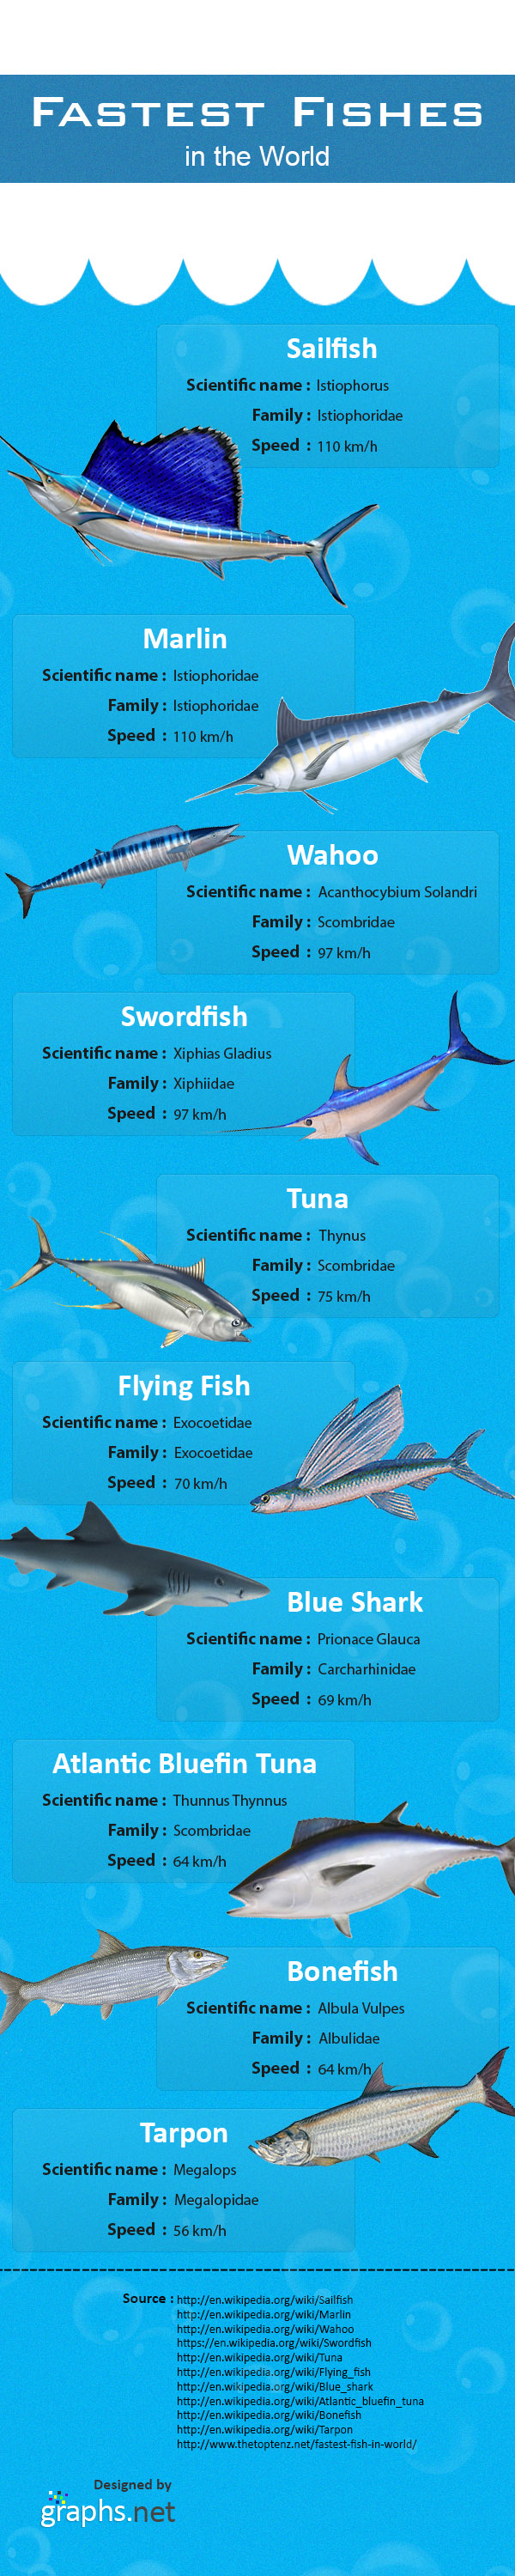 Fastest-Fishes-in-the-World